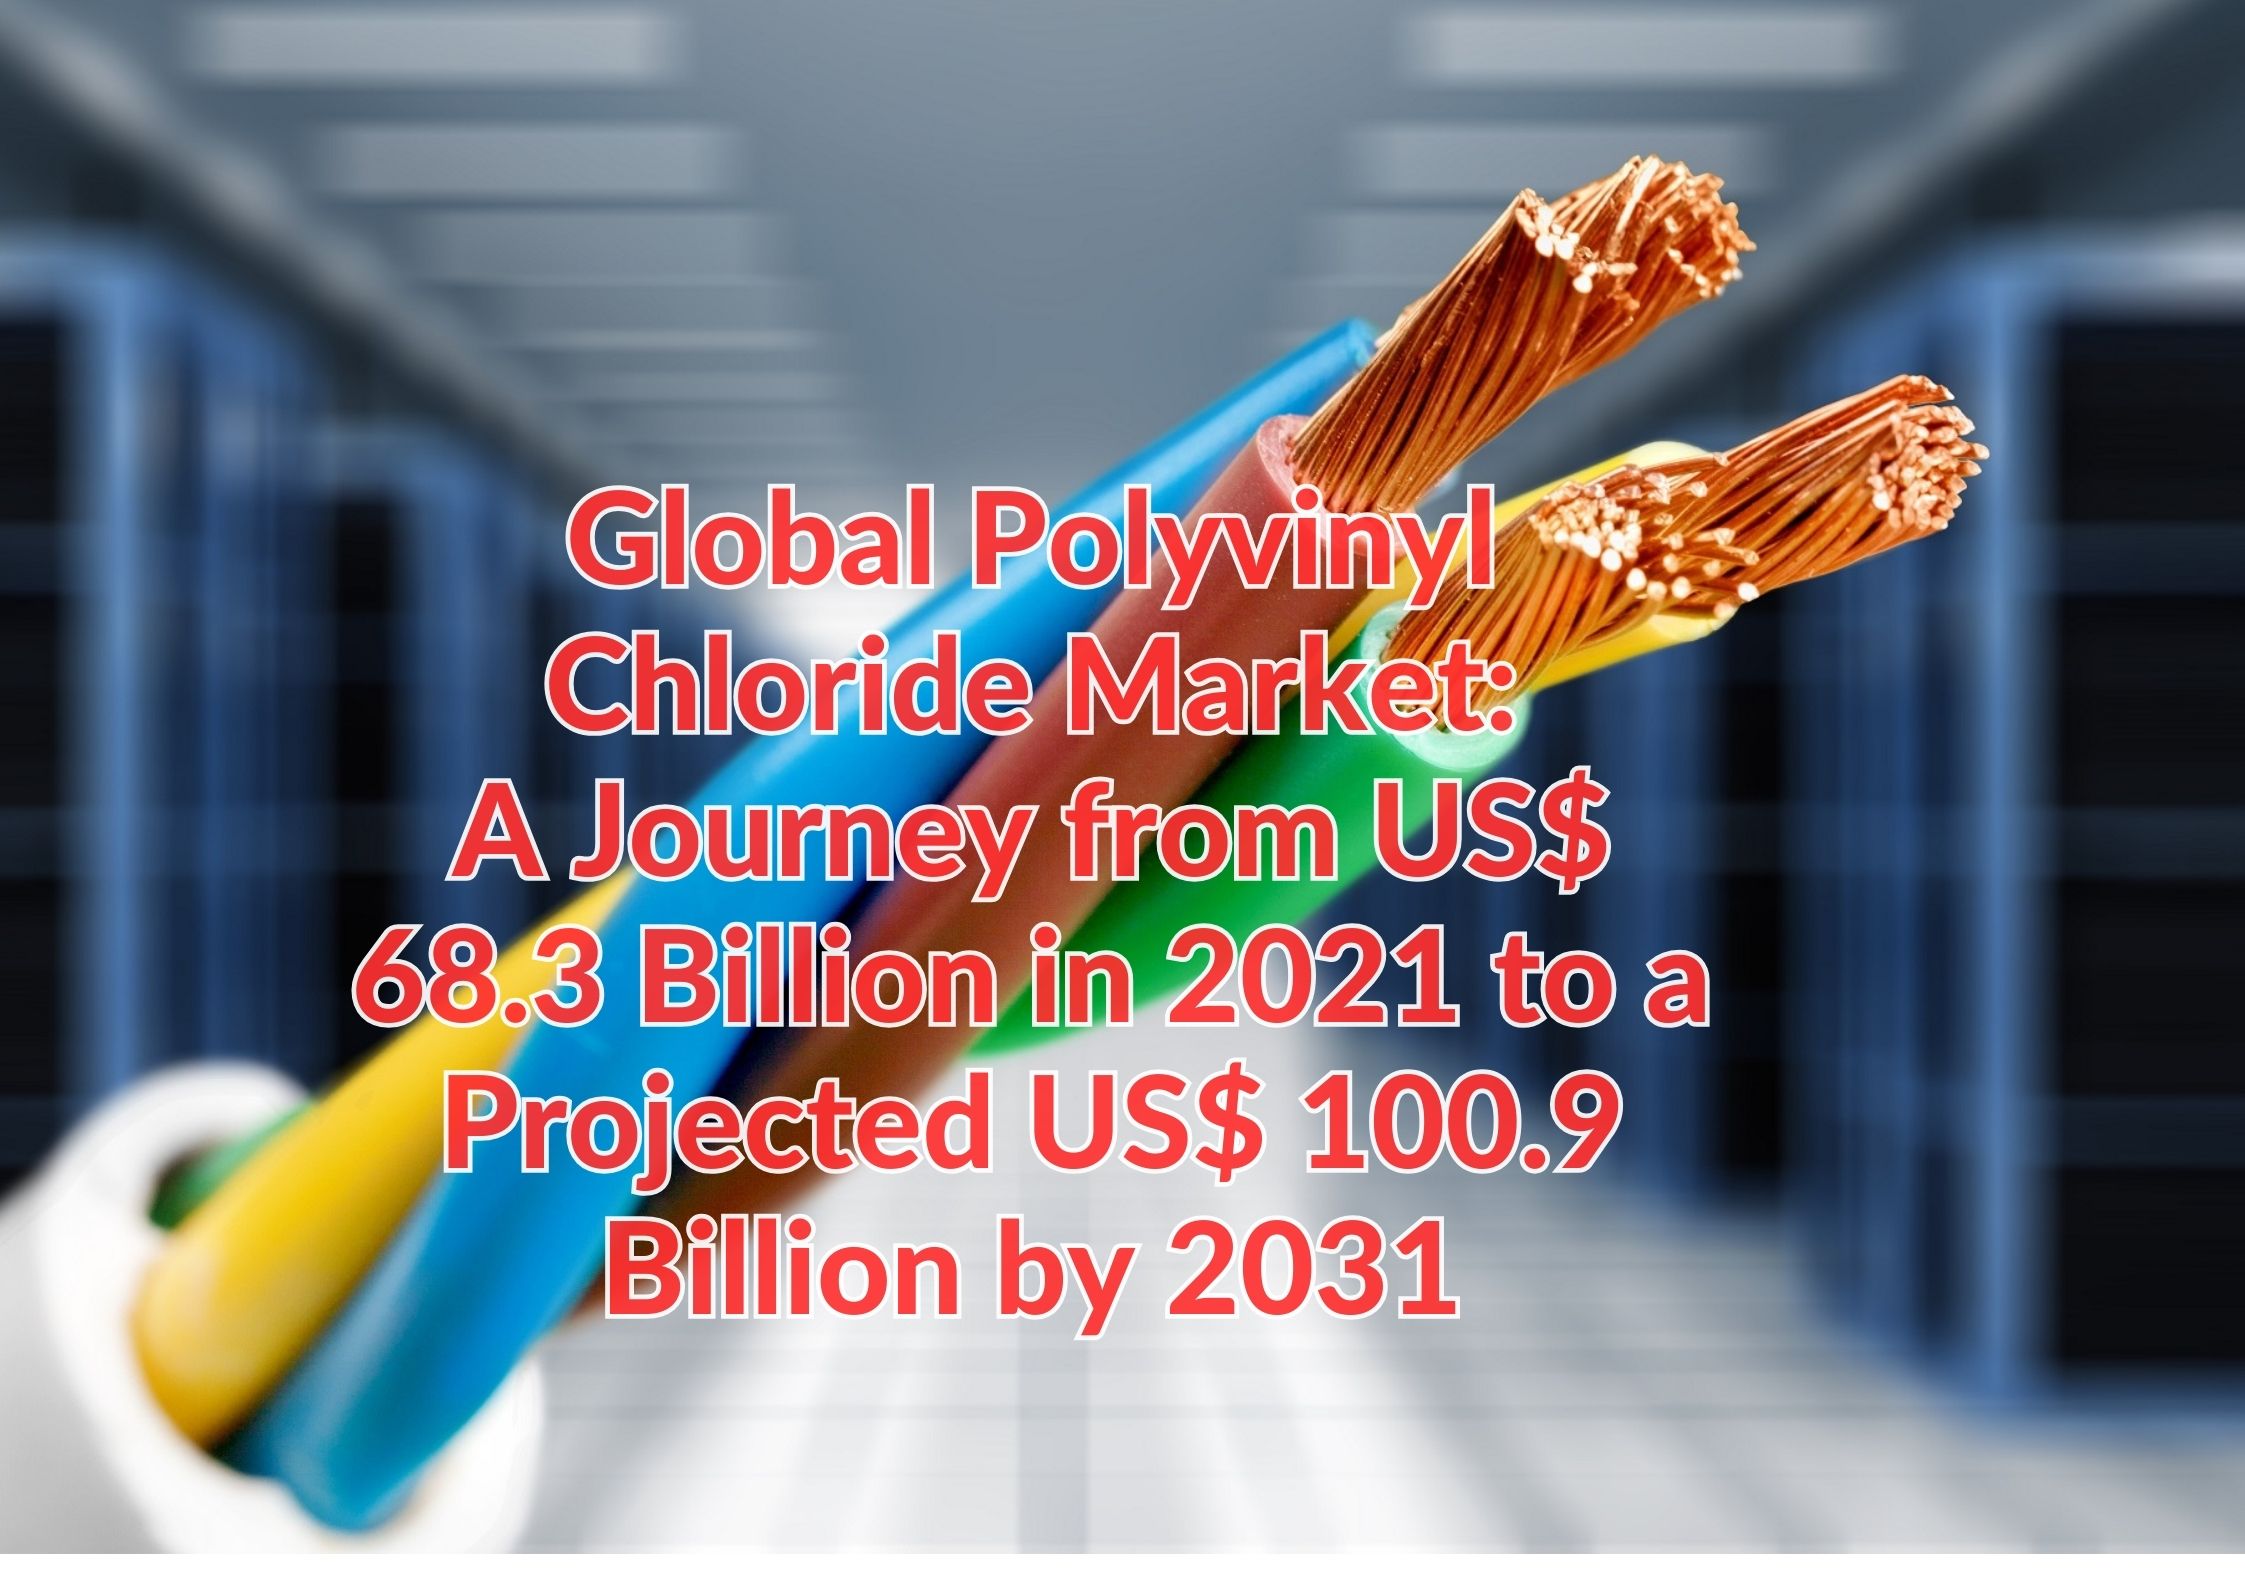 Global Polyvinyl Chloride Market: A Journey from US$ 68.3 Billion in 2021 to a Projected US$ 100.9 Billion by 2031